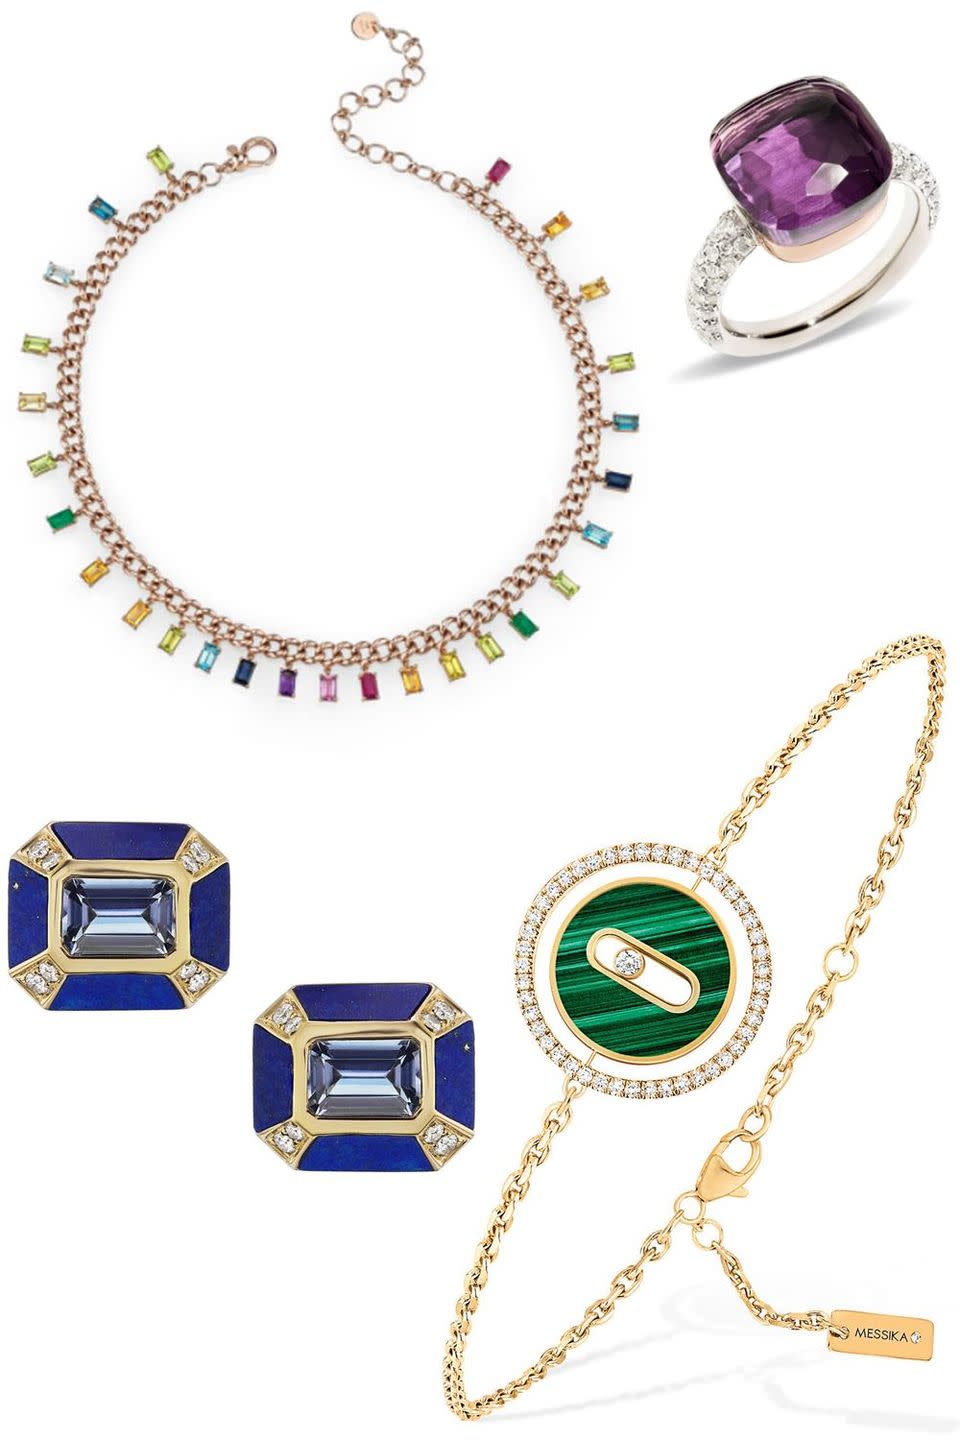 <p>"Vibrant stones and energetic enamel provide a fashion pop! Color instantly updates classic silhouettes and is easily mixed with gold and silver."</p><p><a href="https://go.skimresources.com/?id=74968X1525079&xs=1&url=https%3A%2F%2Fwww.nordstrom.com%2Fs%2Fmessika-lucky-move-malachite-bracelet%2F5962045%3Forigin%3Dcategory-personalizedsort%26breadcrumb%3DHome%252FWomen%252FJewelry%252FFine%2520Jewelry%26fashioncolor%3DBlue%26color%3D701" rel="noopener" target="_blank" data-ylk="slk:Messika;elm:context_link;itc:0;sec:content-canvas" class="link ">Messika</a> Lucky Move Malachite Bracelet, $2,580</p><p><a href="https://go.skimresources.com/?id=74968X1525079&xs=1&url=https%3A%2F%2Fwww.nordstrom.com%2Fs%2Fshay-rainbow-baguette-link-choker-necklace%2F5764348%3Forigin%3Dcategory-personalizedsort%26breadcrumb%3DHome%252FWomen%252FJewelry%252FNecklaces%26color%3D712" rel="noopener" target="_blank" data-ylk="slk:Shay;elm:context_link;itc:0;sec:content-canvas" class="link ">Shay</a> Rainbow Baguette Link Choker Necklace, $8,820</p><p><a href="https://go.skimresources.com/?id=74968X1525079&xs=1&url=https%3A%2F%2Fwww.nordstrom.com%2Fs%2Fpomellato-nudo-maxi-stone-diamond-ring%2F5483589%3Forigin%3Dkeywordsearch-personalizedsort%26breadcrumb%3DHome%252FAll%2520Results%26color%3D500" rel="noopener" target="_blank" data-ylk="slk:Pomellato;elm:context_link;itc:0;sec:content-canvas" class="link ">Pomellato</a> Nudo Maxi Stone Diamond Ring, $5,800</p><p><a href="https://go.skimresources.com/?id=74968X1525079&xs=1&url=https%3A%2F%2Fwww.nordstrom.com%2Fs%2Fsorellina-mini-monroe-inlay-earrings%2F5781409%3Forigin%3Dcategory-personalizedsort%26breadcrumb%3DHome%252FWomen%252FJewelry%252FEarrings%26color%3D710" rel="noopener" target="_blank" data-ylk="slk:Sorellina;elm:context_link;itc:0;sec:content-canvas" class="link ">Sorellina</a> Mini Monroe Inlay Earrings, $4,250 </p>